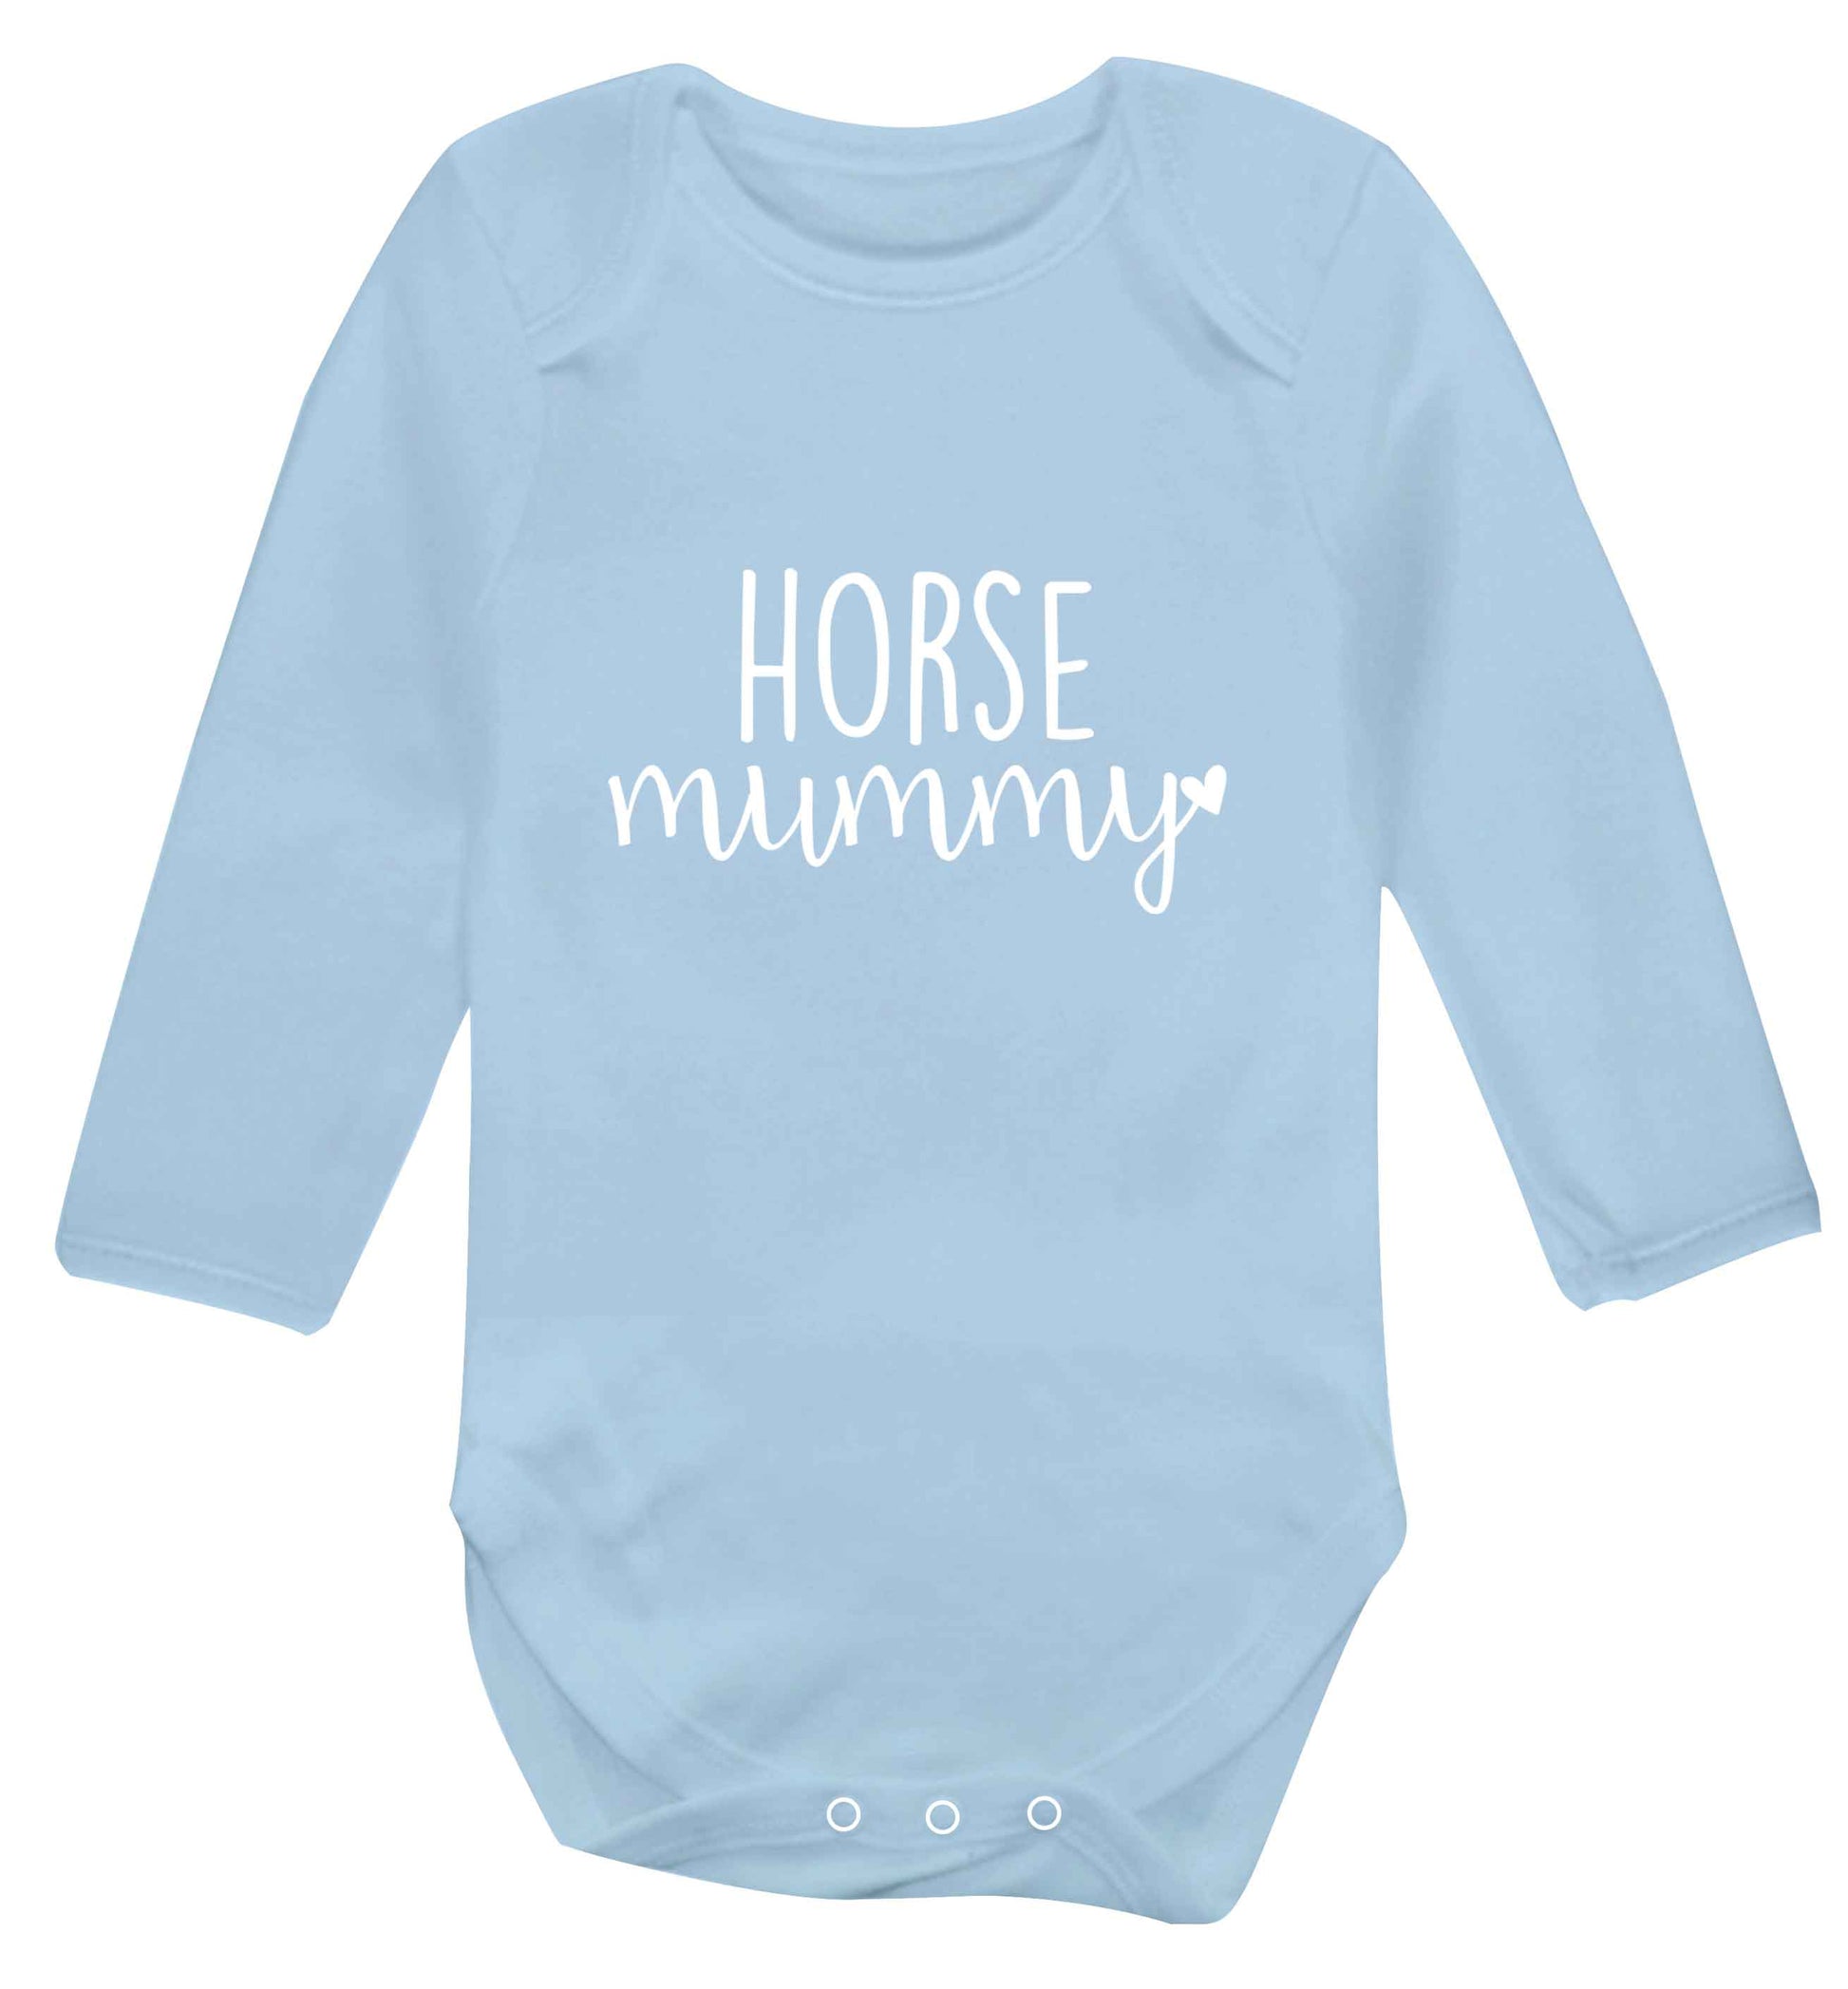 Horse mummy baby vest long sleeved pale blue 6-12 months